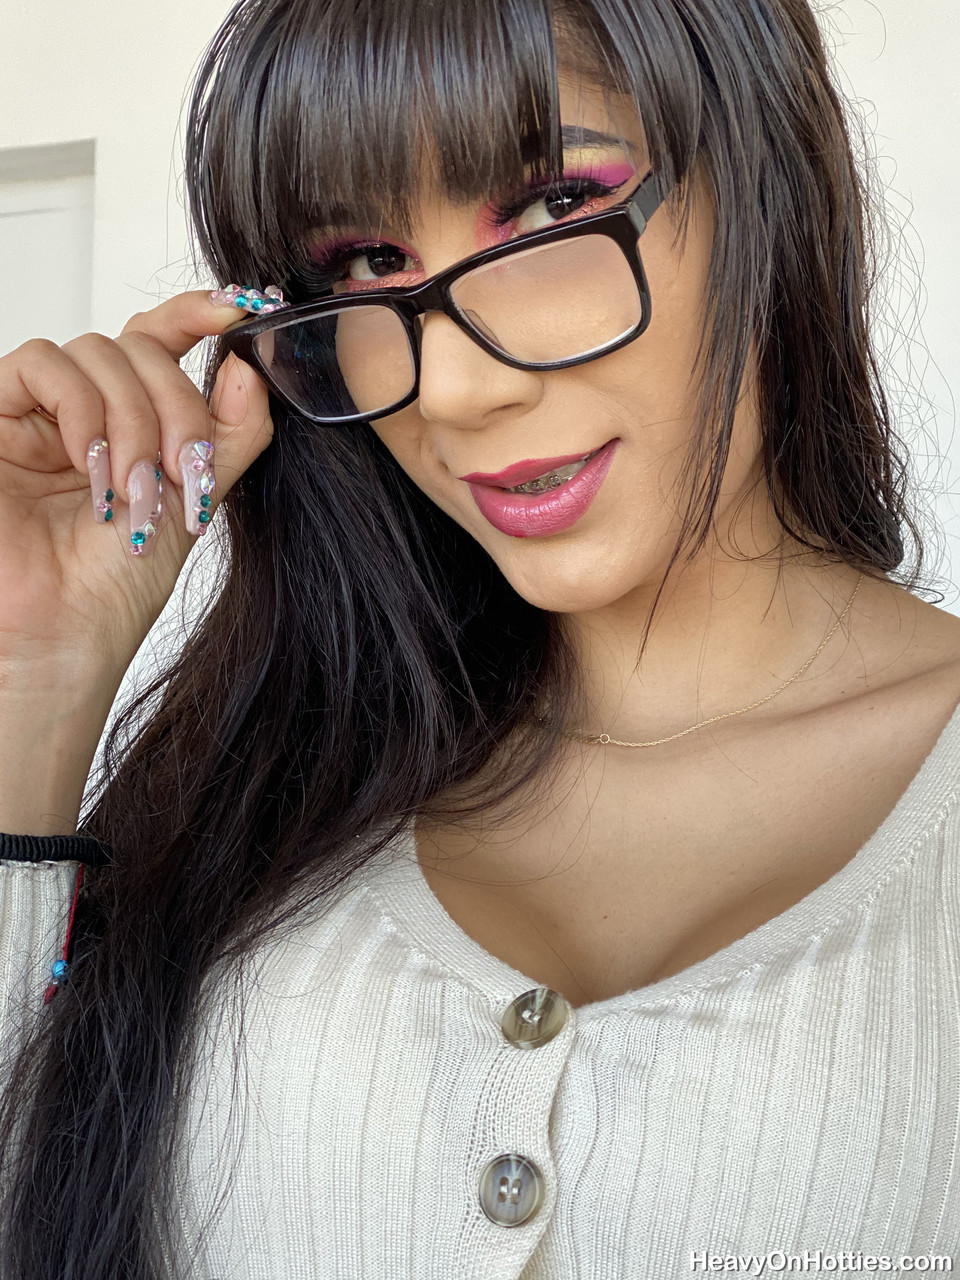 Sexy brunette Mia Marin strips to her shoes and glasses before POV action 포르노 사진 #424700857 | Heavy On Hotties Pics, Mia Marin, POV, 모바일 포르노